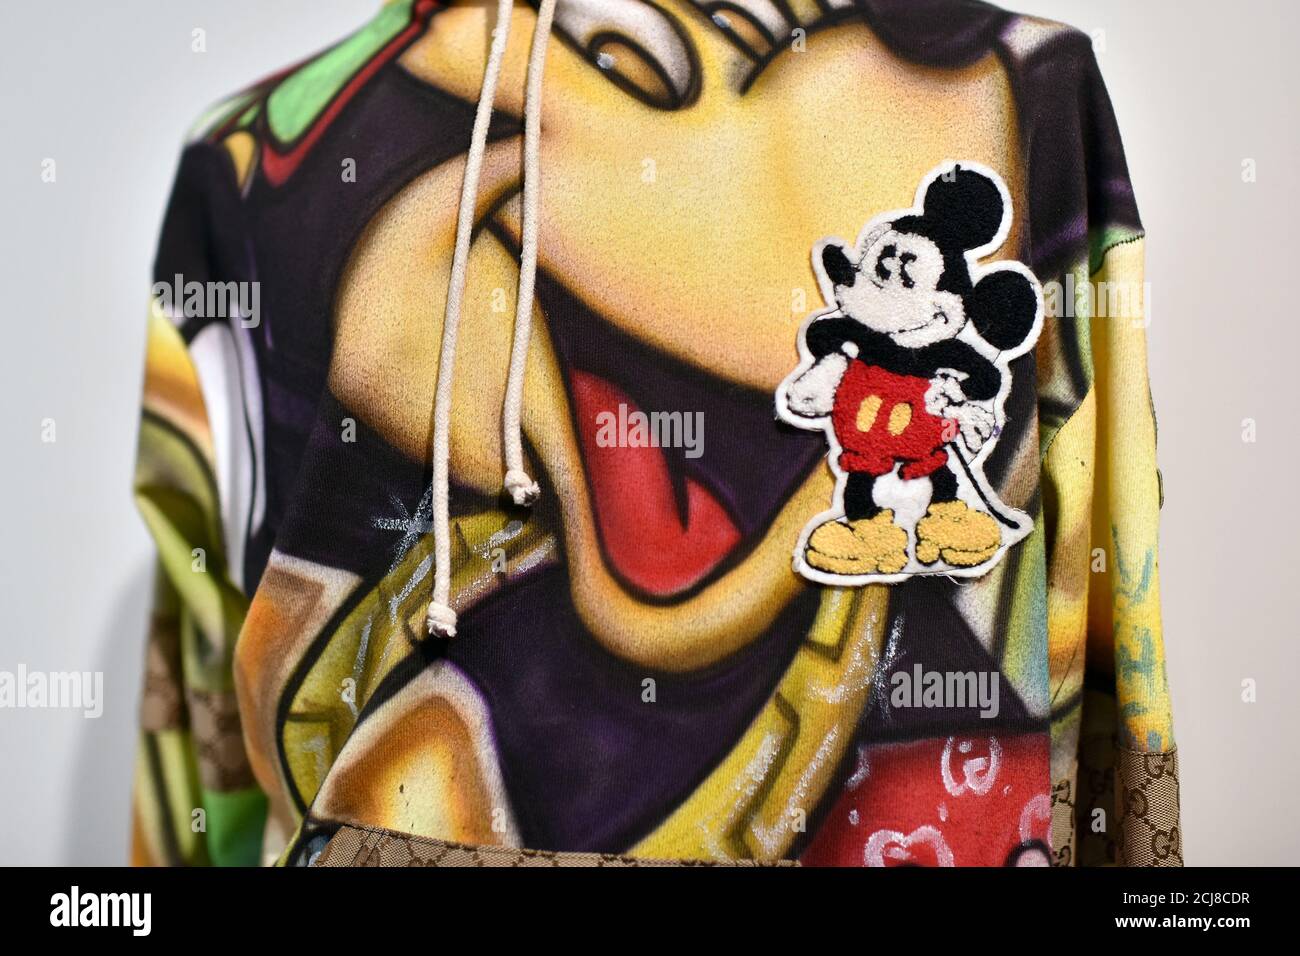 New York City, USA. 14th Sep, 2020. Shirt King Phade Custom "Gucci" Hoodie on display at Sotheby's “The History and Impact of Hip auction in New York, NY, 14, 2020. (